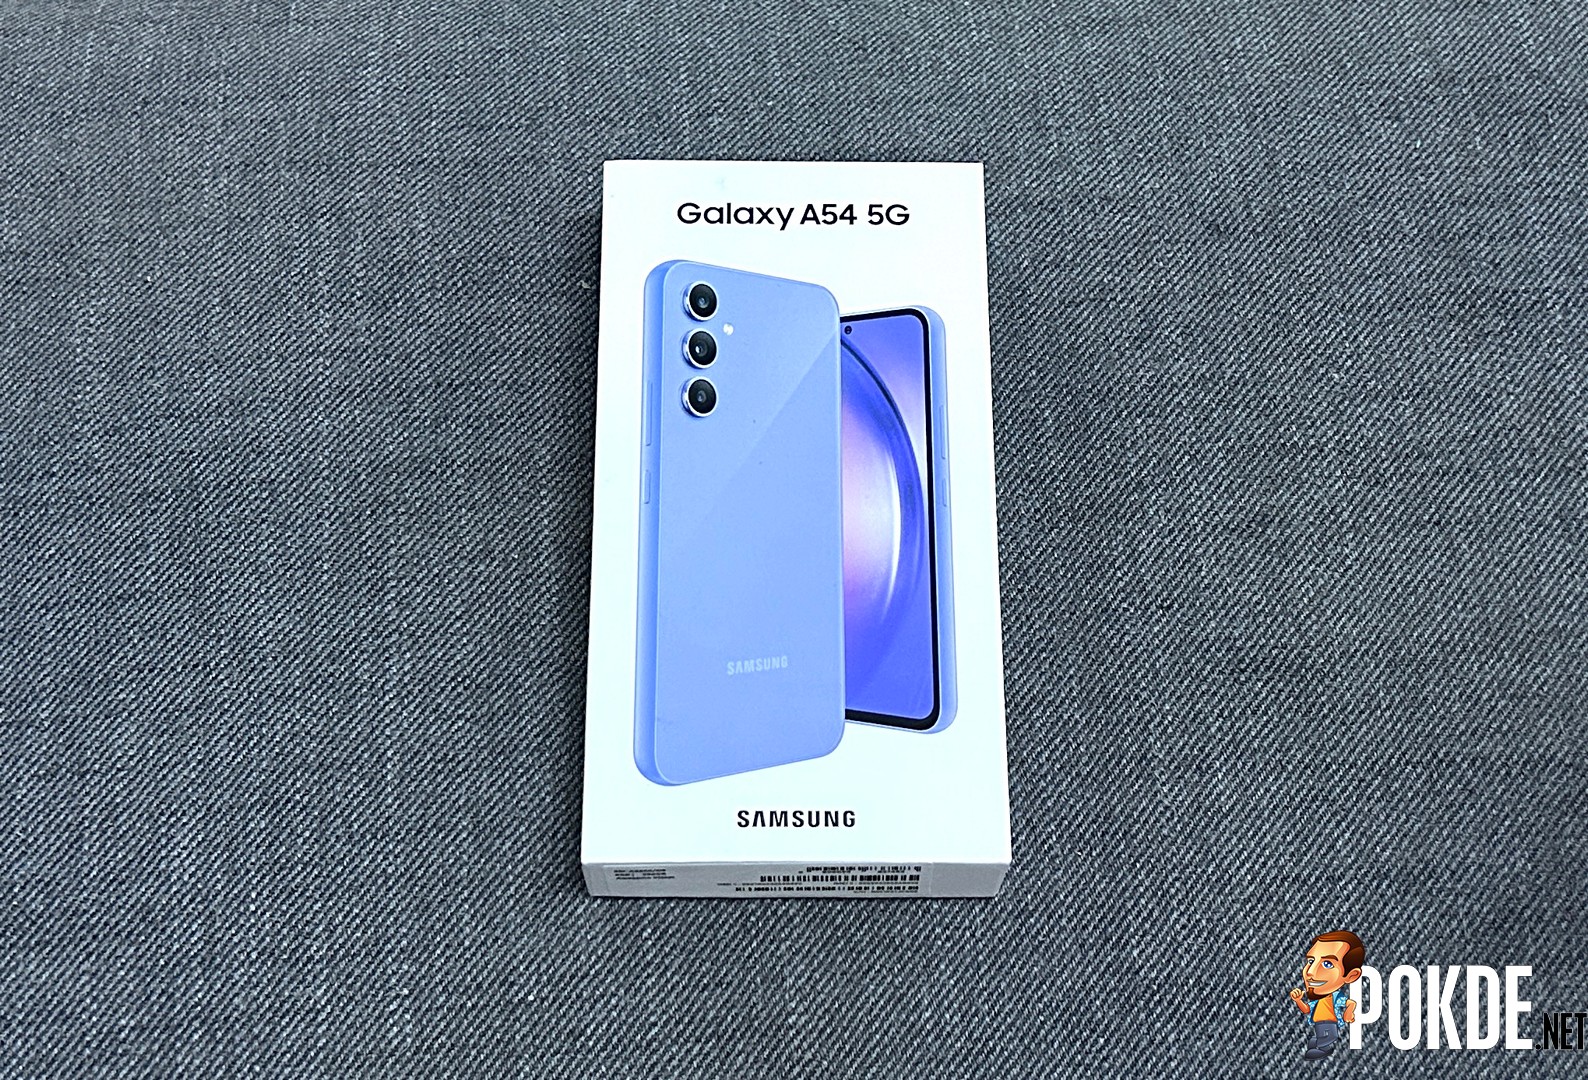 Samsung Galaxy A54: First technical data and pictures